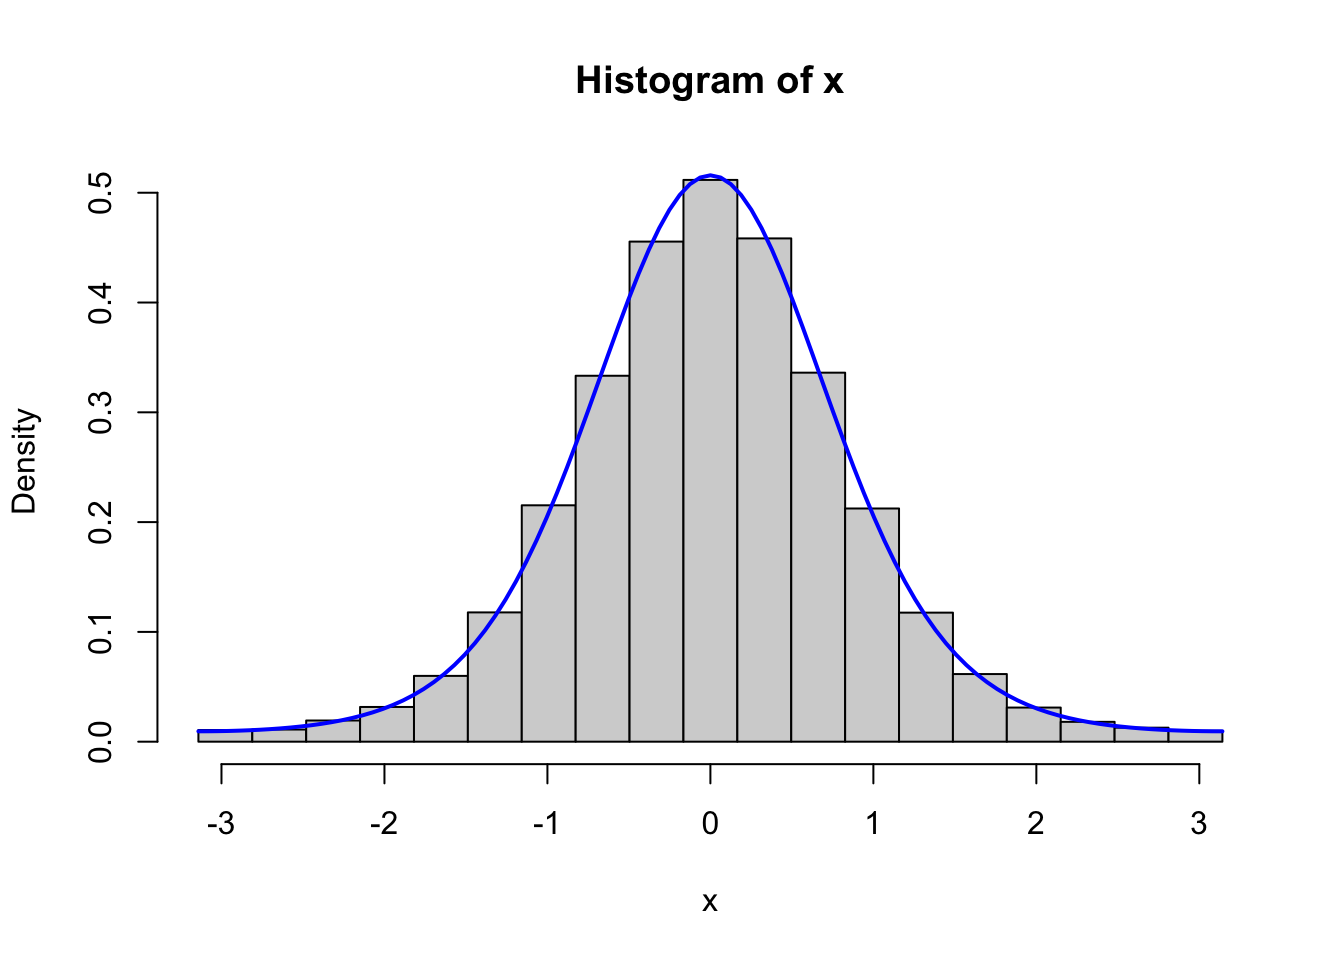 Histograms of 100,000 simulated data points from von Mises distributions with parameters \(\kappa = 0.5\) (left) and \(\kappa = 2\) (right), simulated using vectorized generation of random variables.